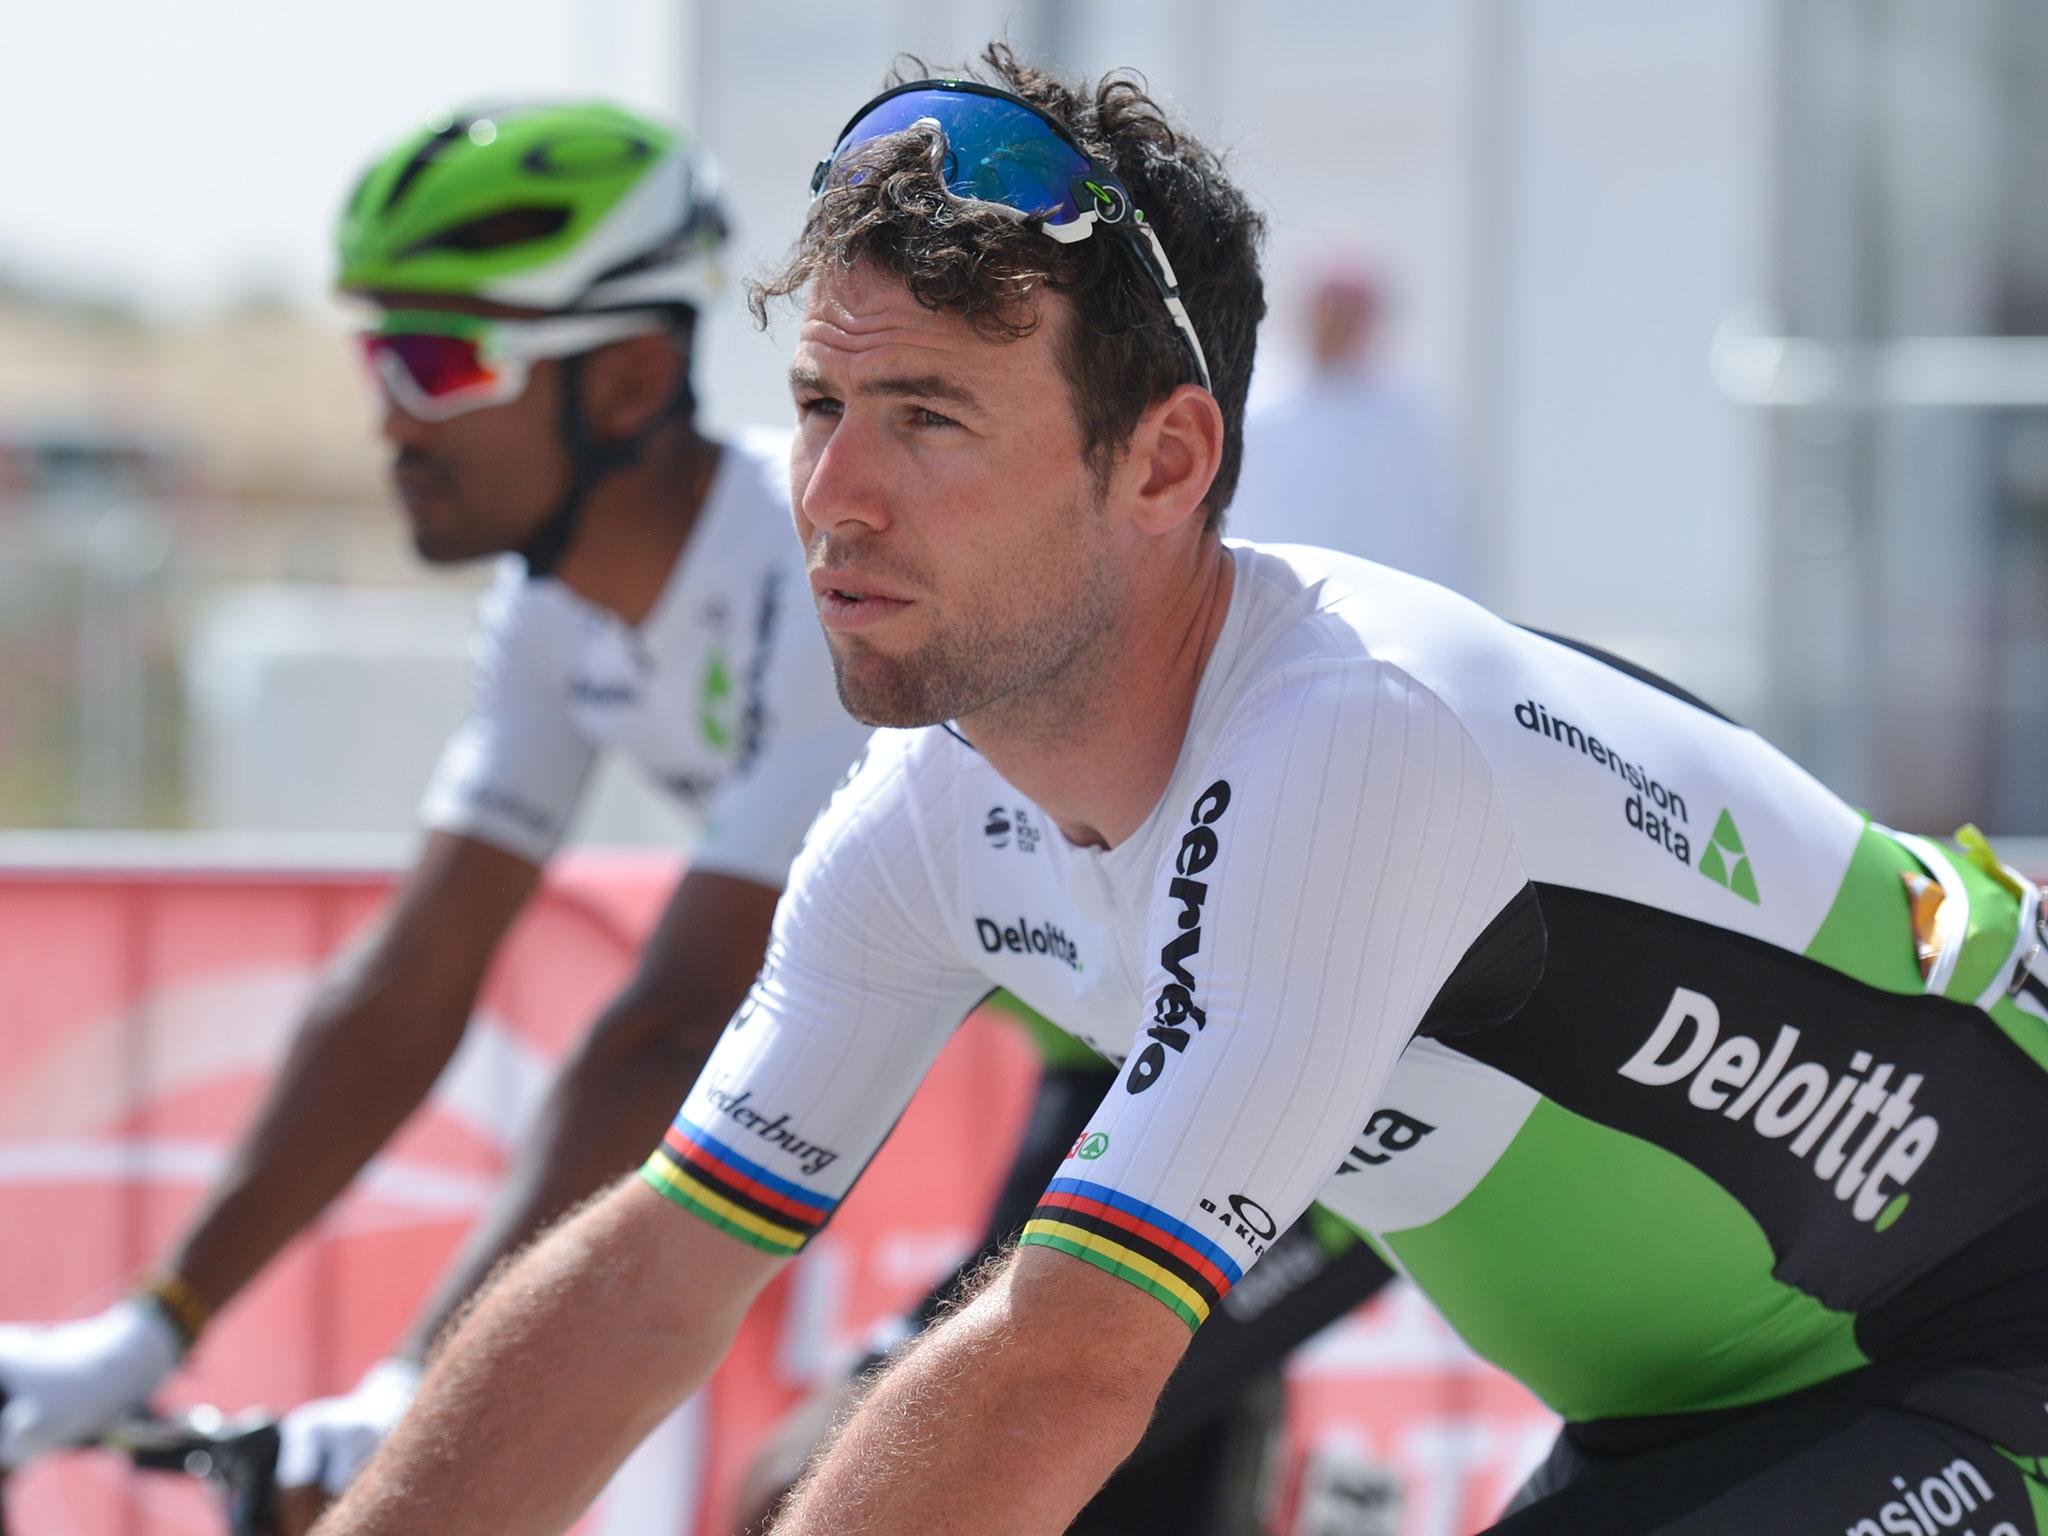 Mark Cavendish is chasing history